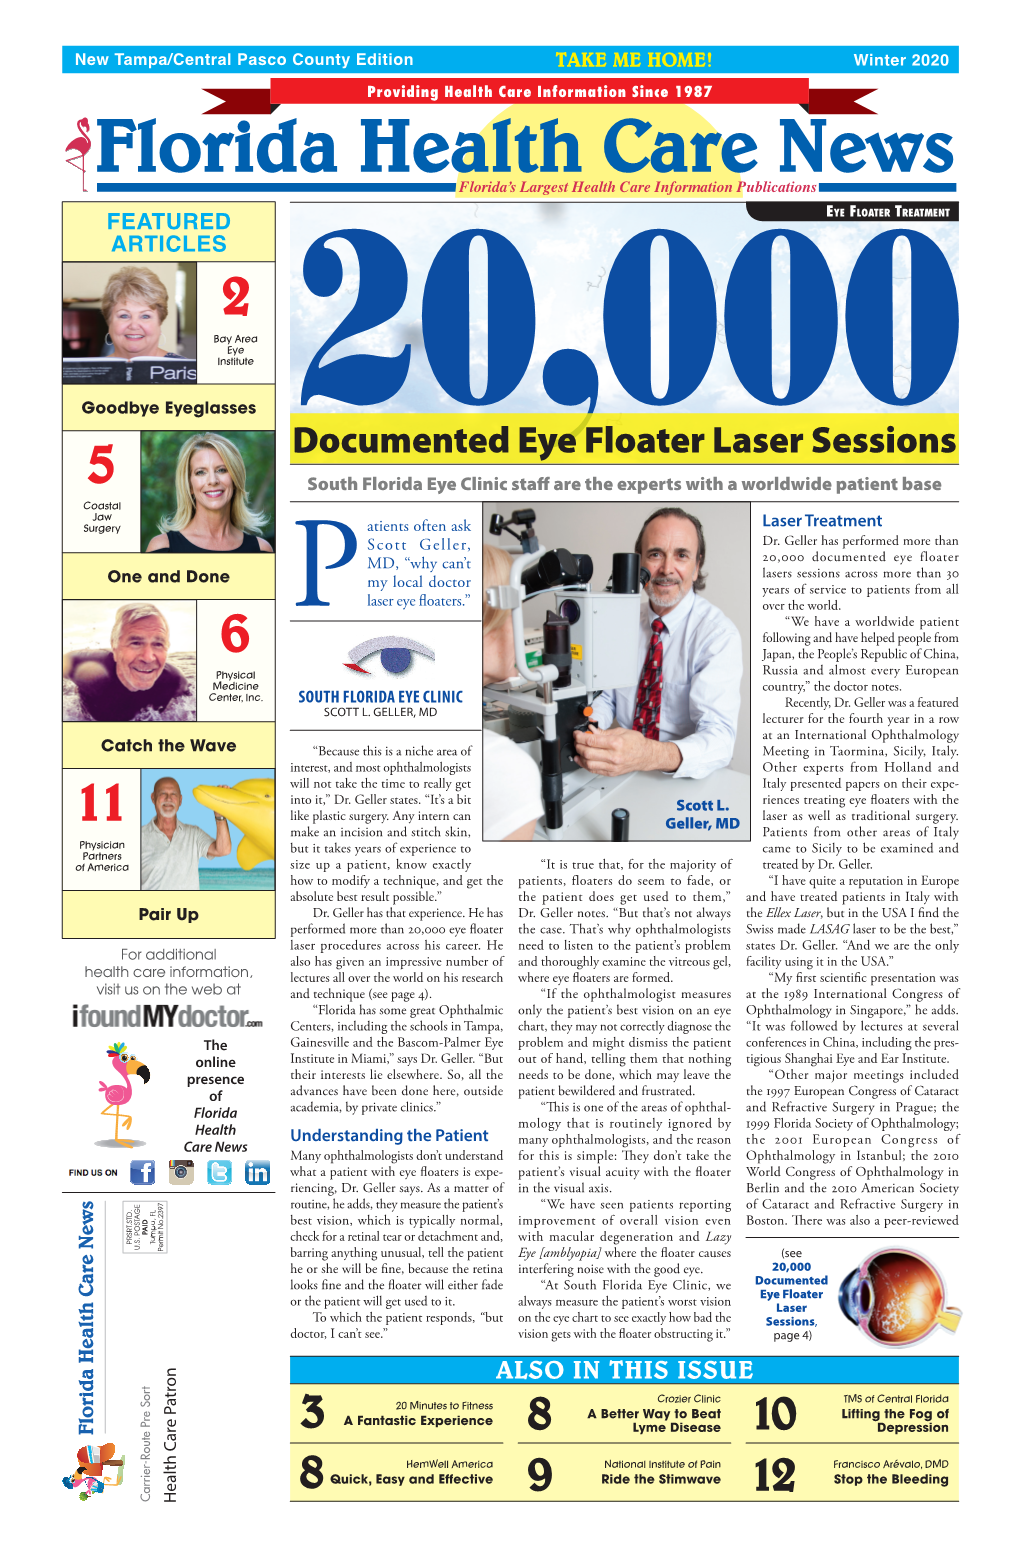 Documented Eye Floater Laser Sessions